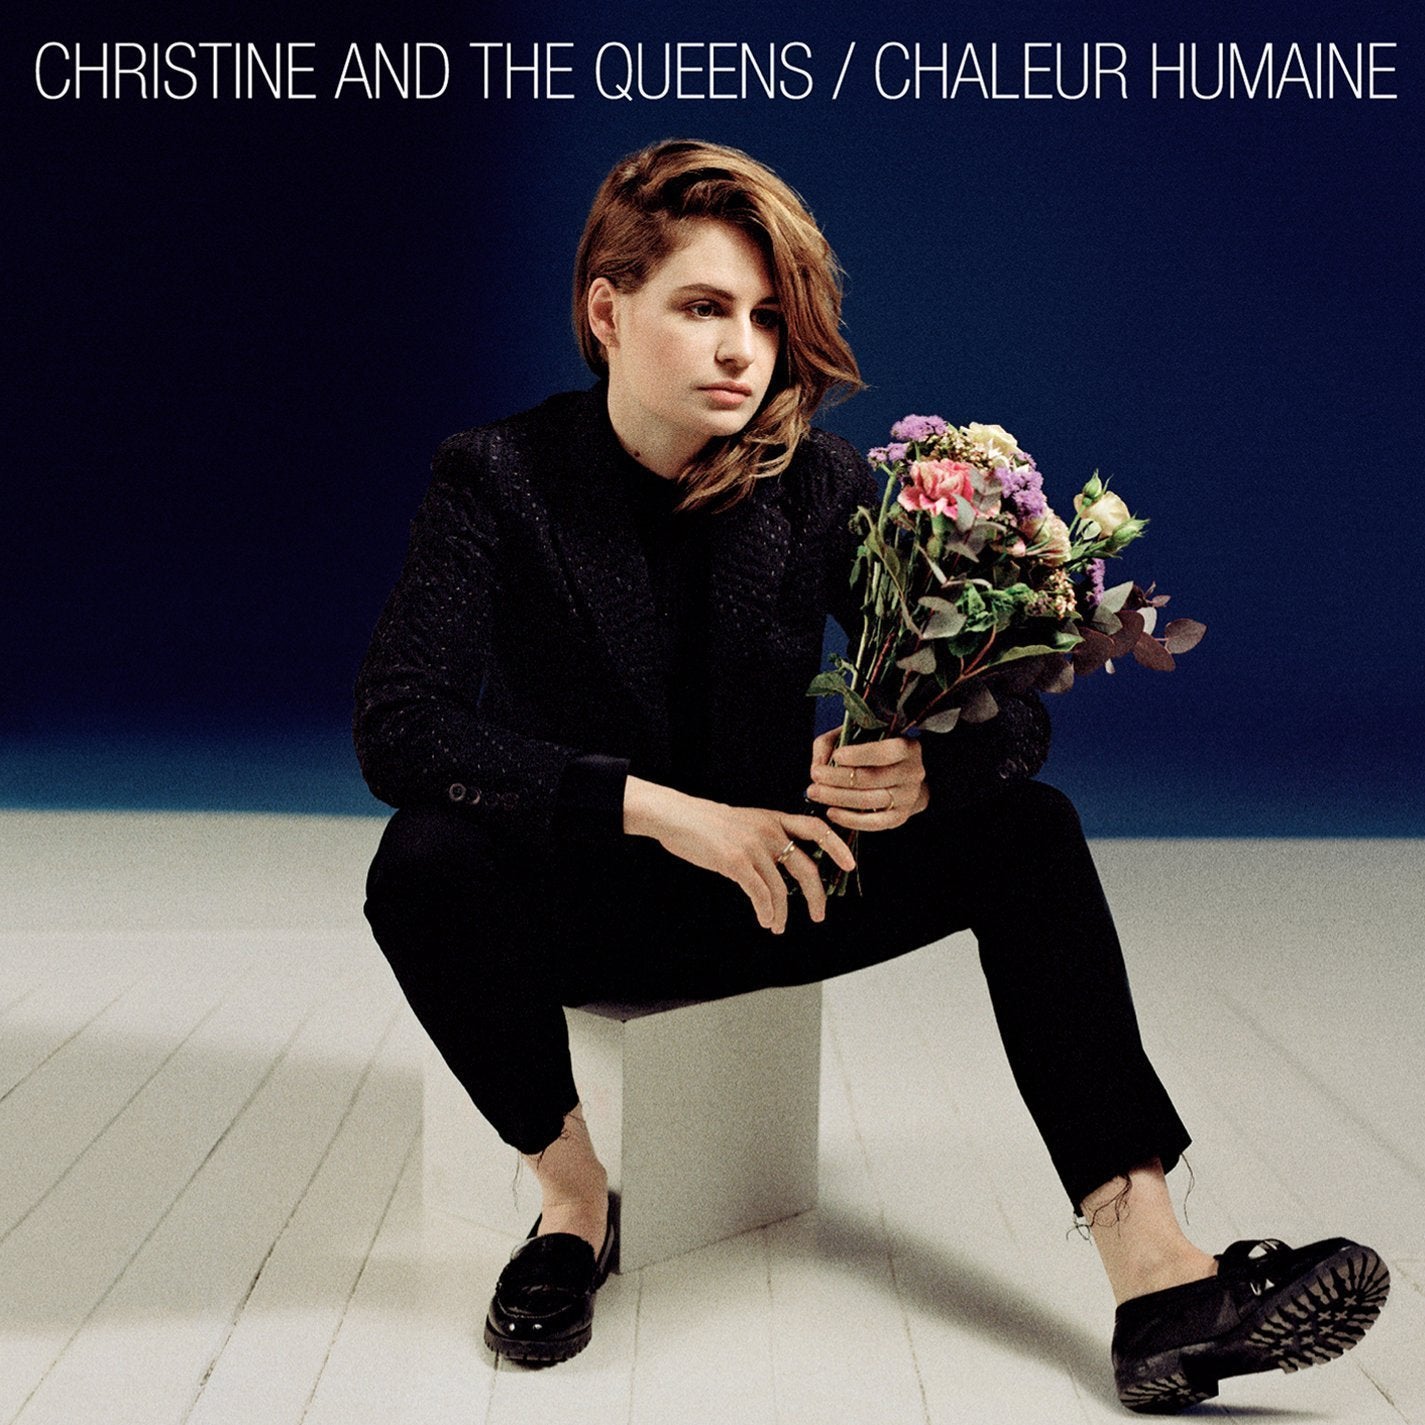 CHRISTINE AND THE QUEENS - CHALEUR HUMAINE Vinyl LP